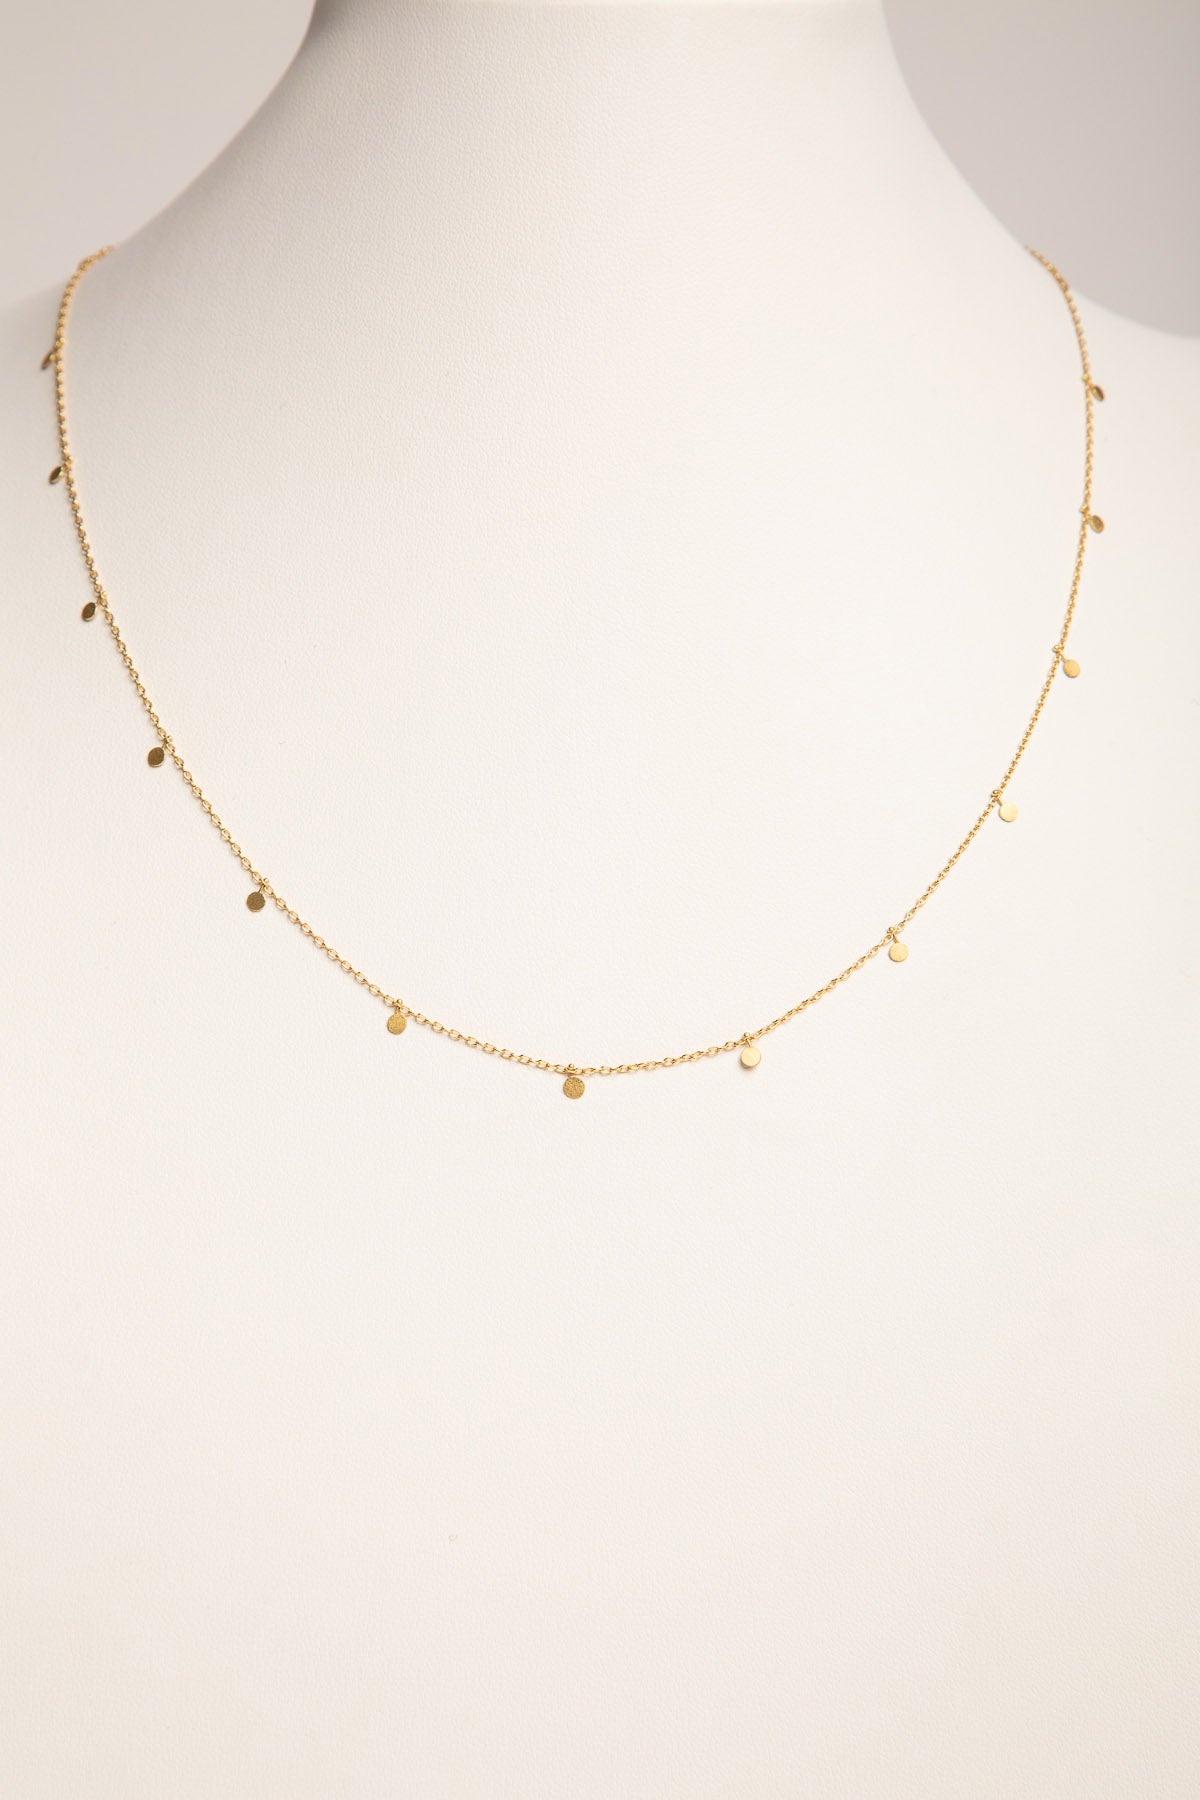 SIA TAYLOR | EVEN DOTS GOLD NECKLACE